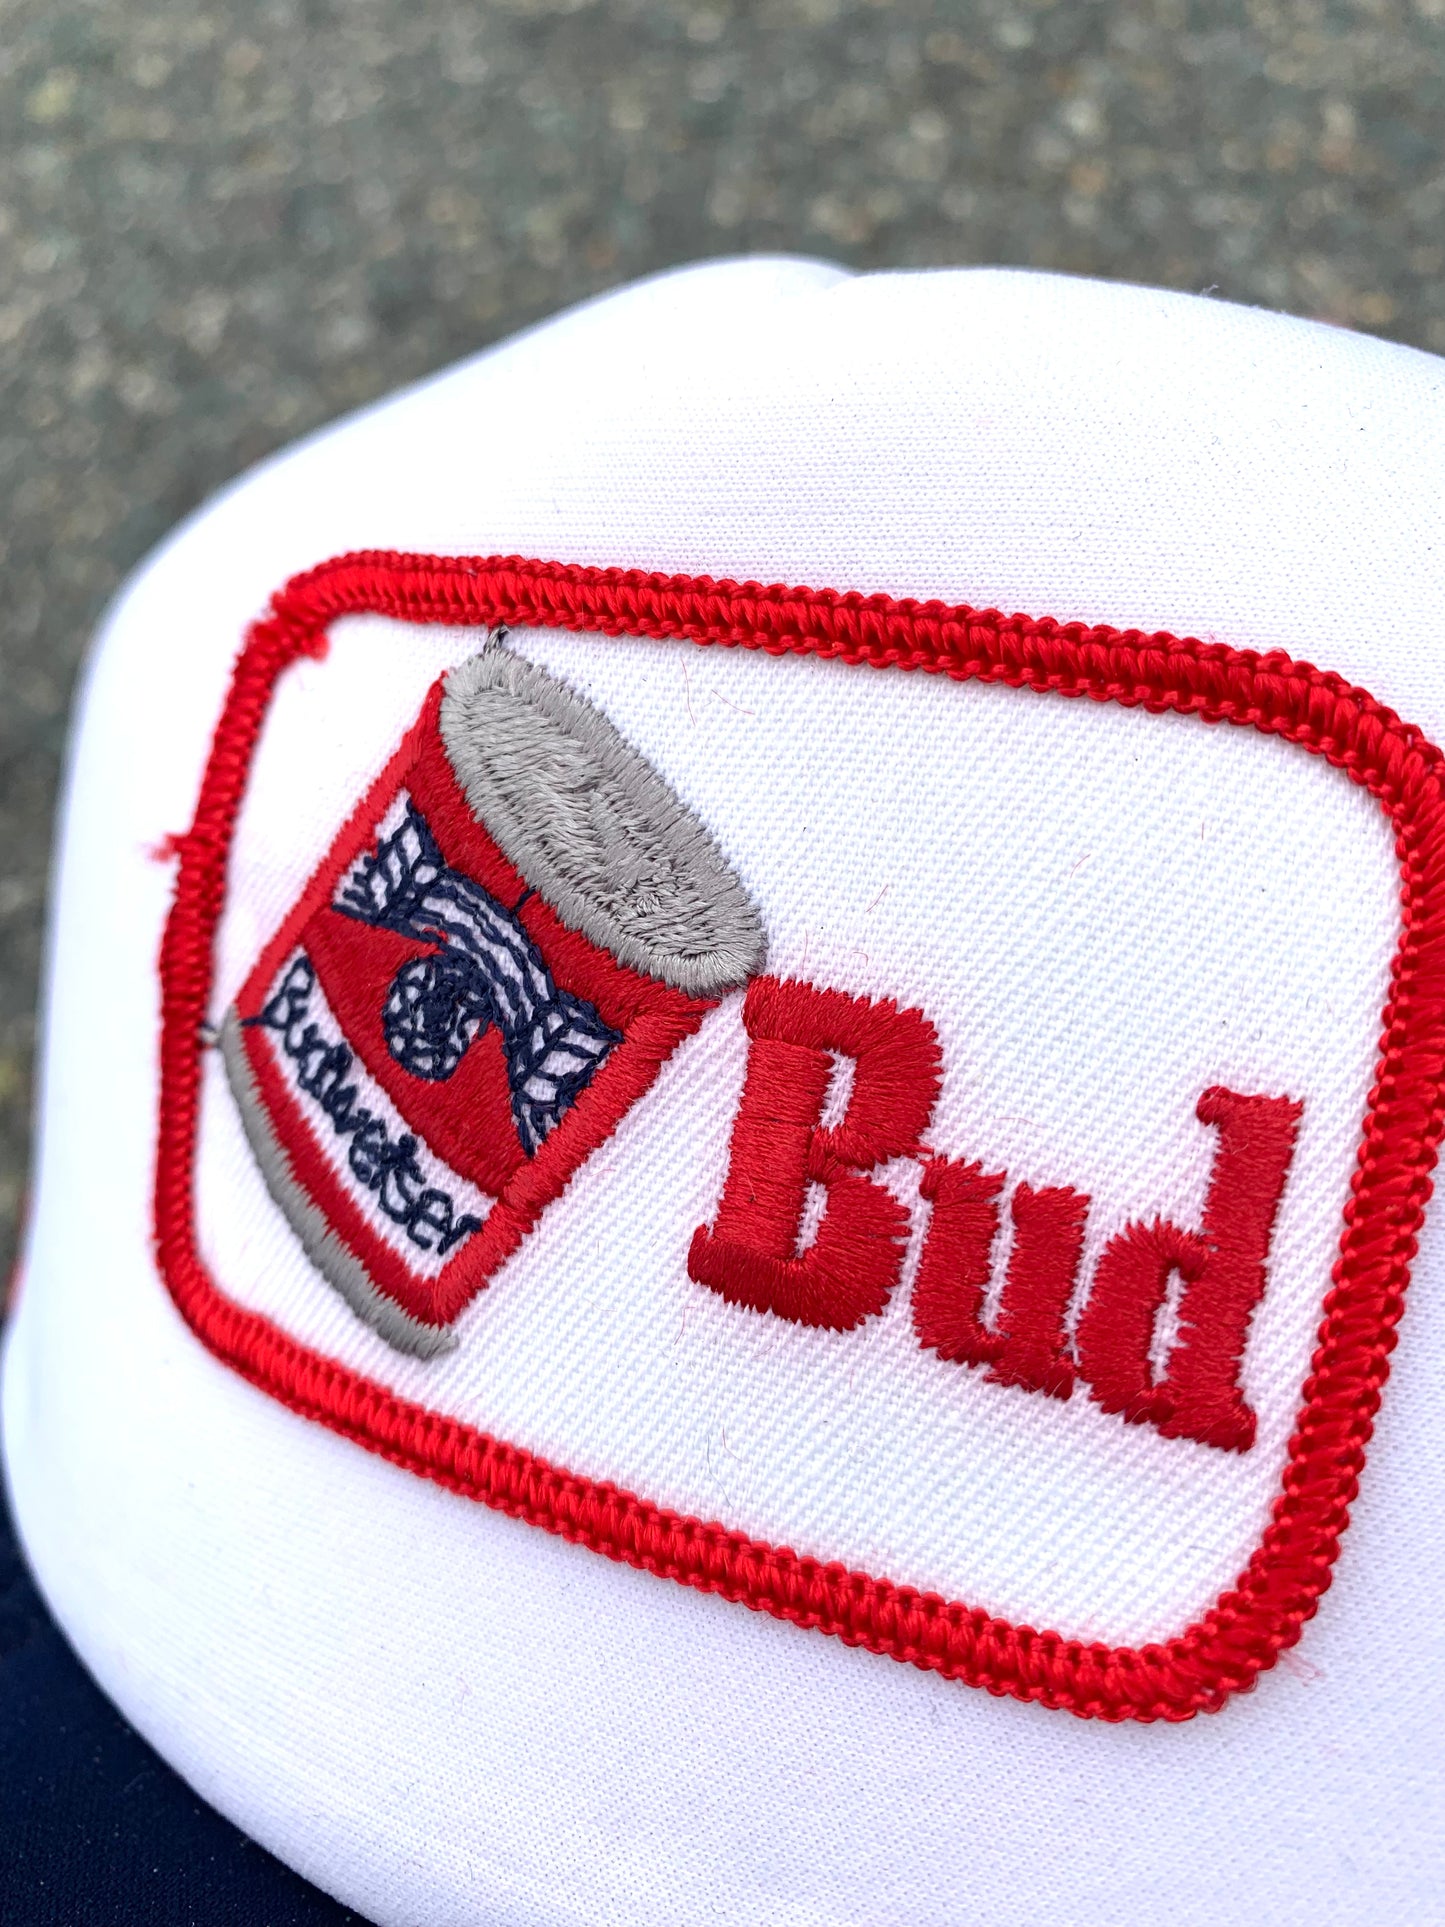 Vintage Budweiser Beer Can Logo Retro 80's Colorblock Trucker Style Snapback Hat